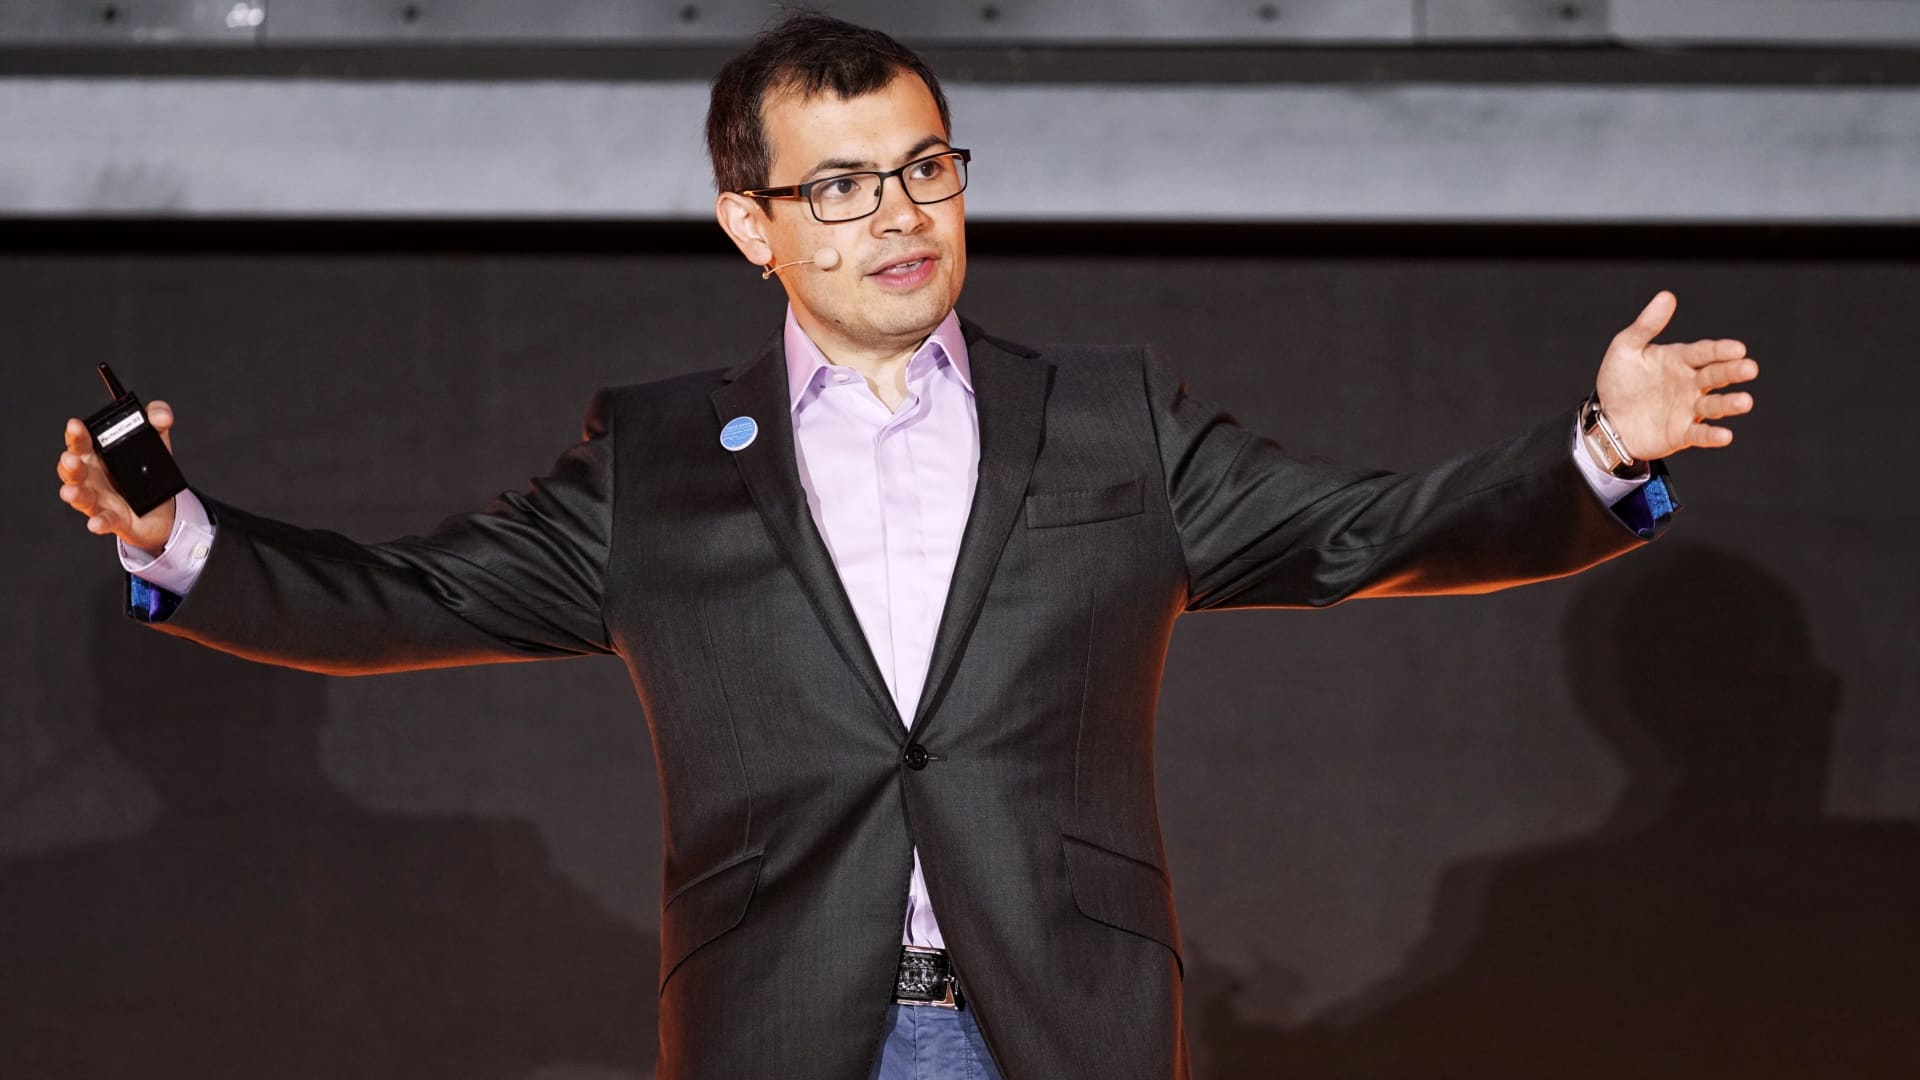 DeepMind CEO Demis Hassabis at a 2017 event in China.